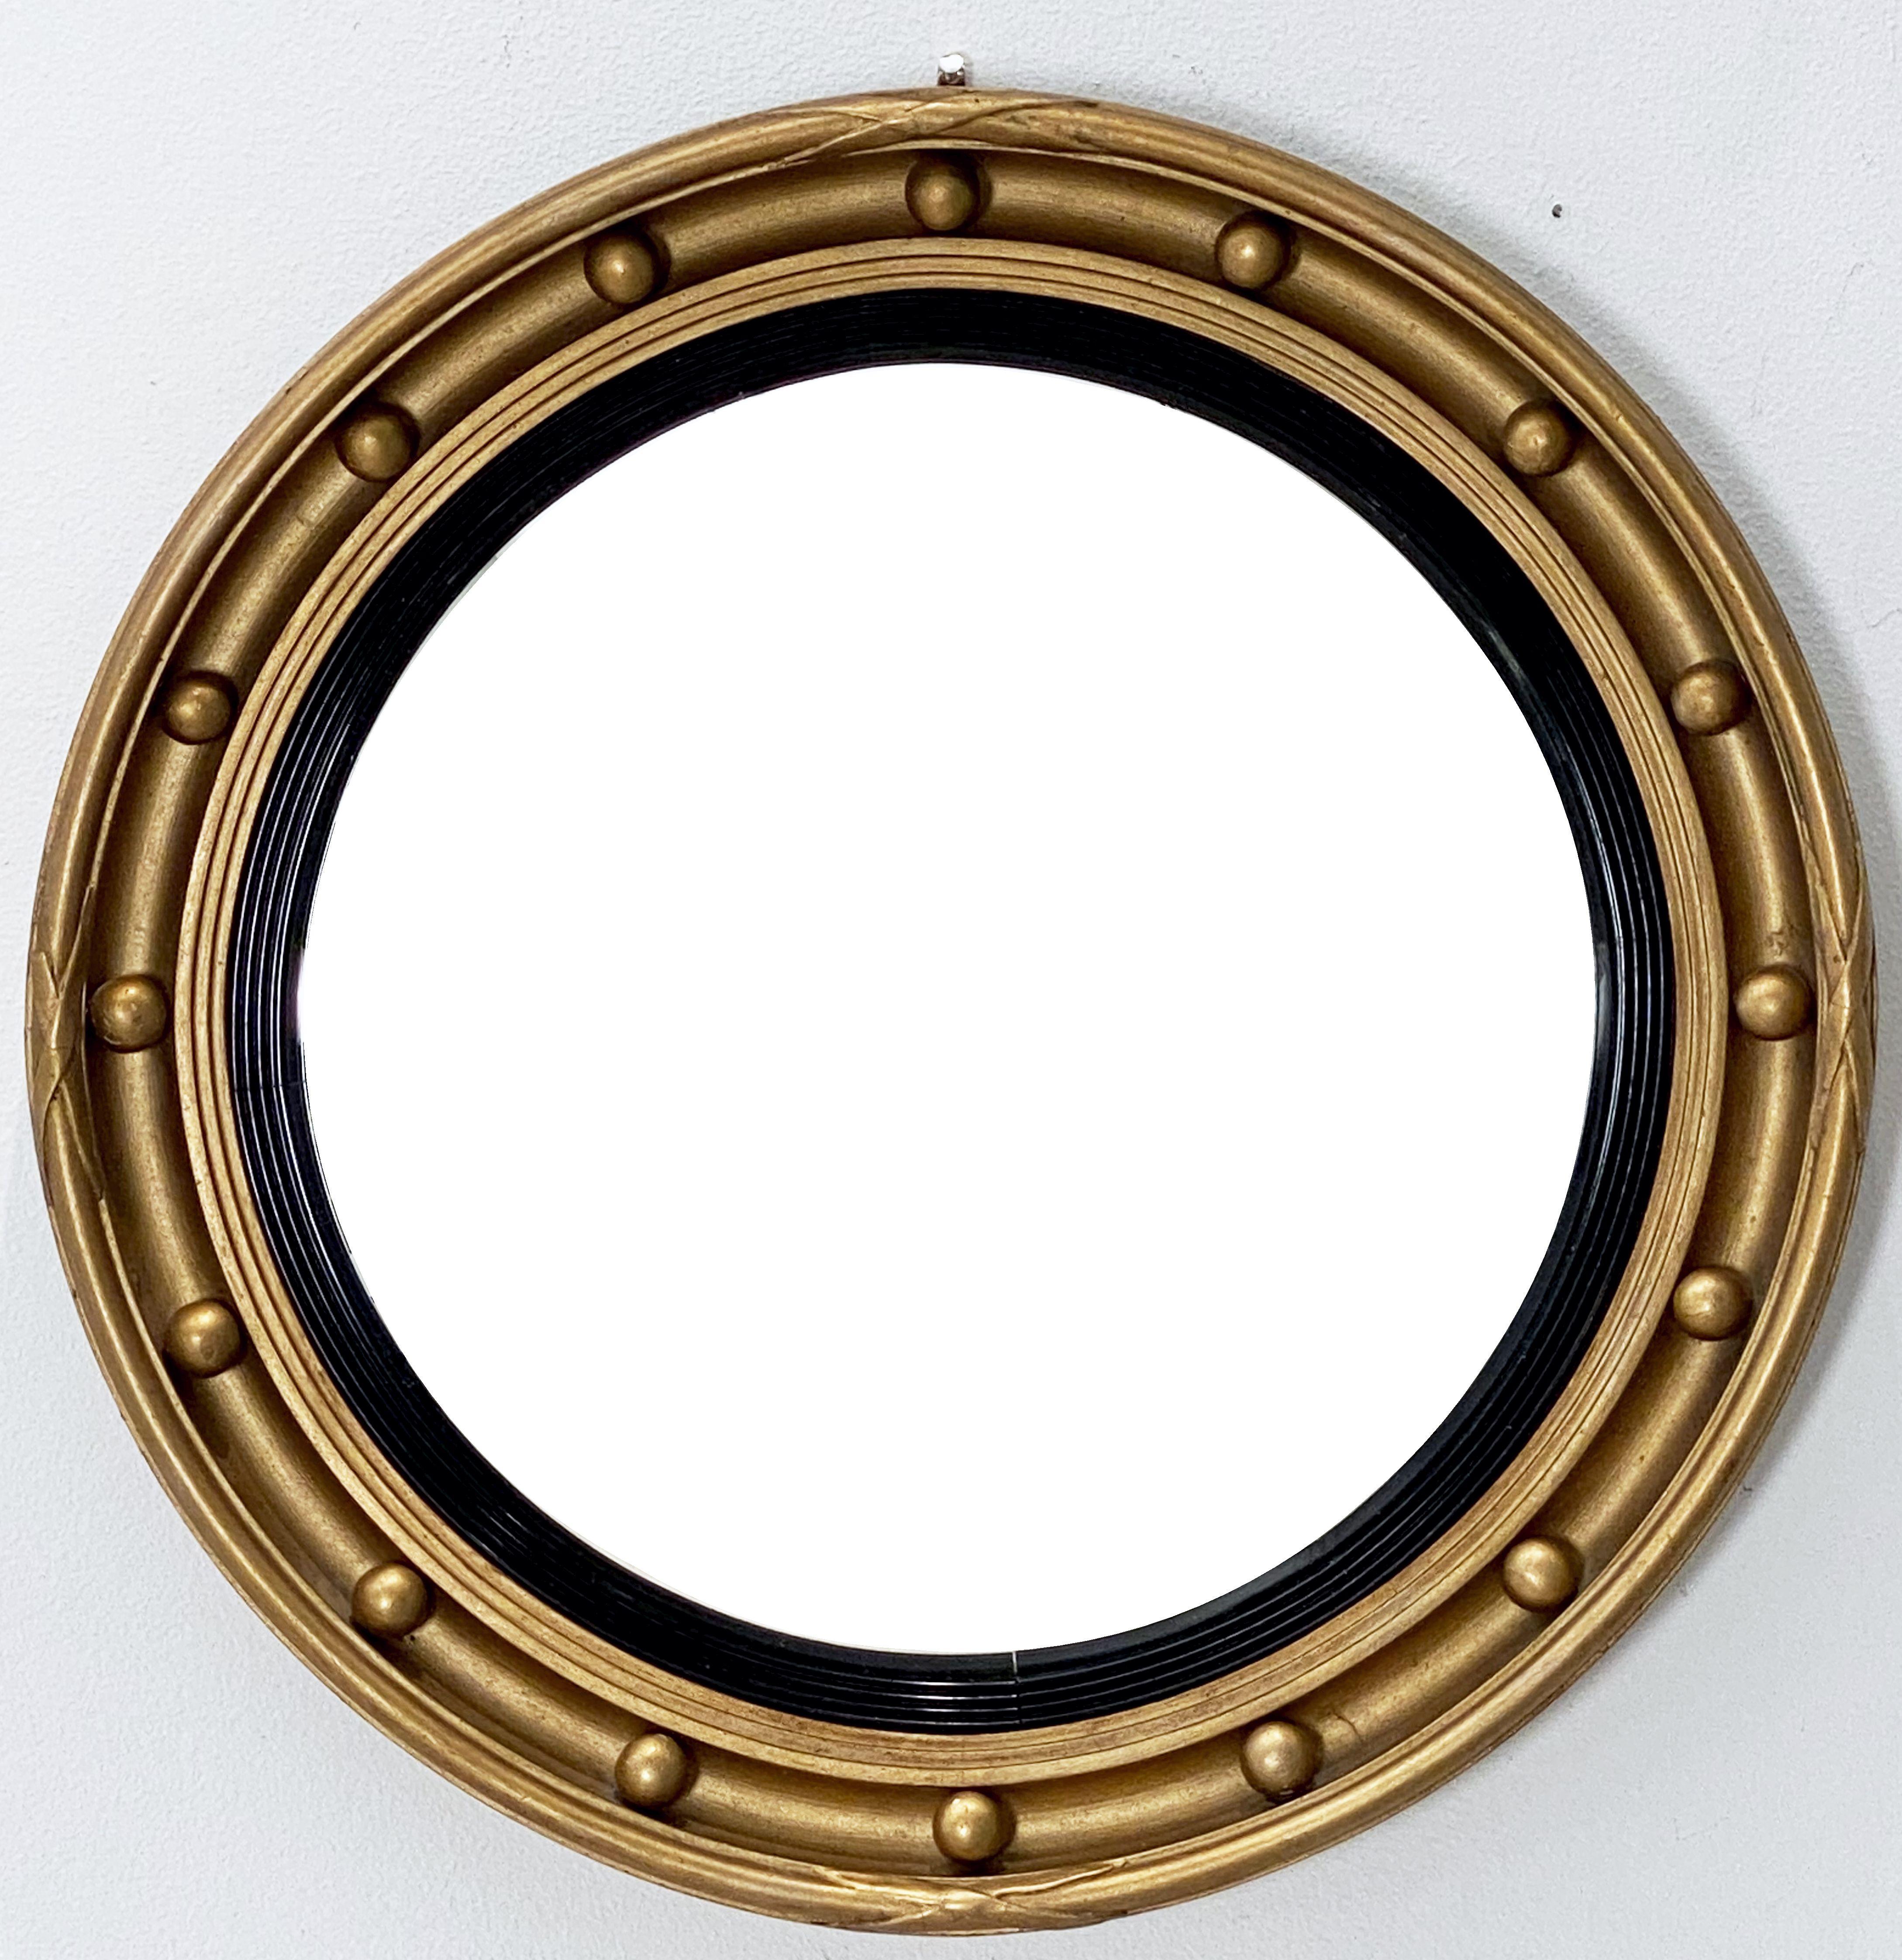 A fine English round or circular convex mirror featuring a Regency design of a moulded gilt frame and ebonized trim, with gilt balls around the circumference.

Dimensions: Diameter 18 3/8 inches x depth 2 1/4 inches.